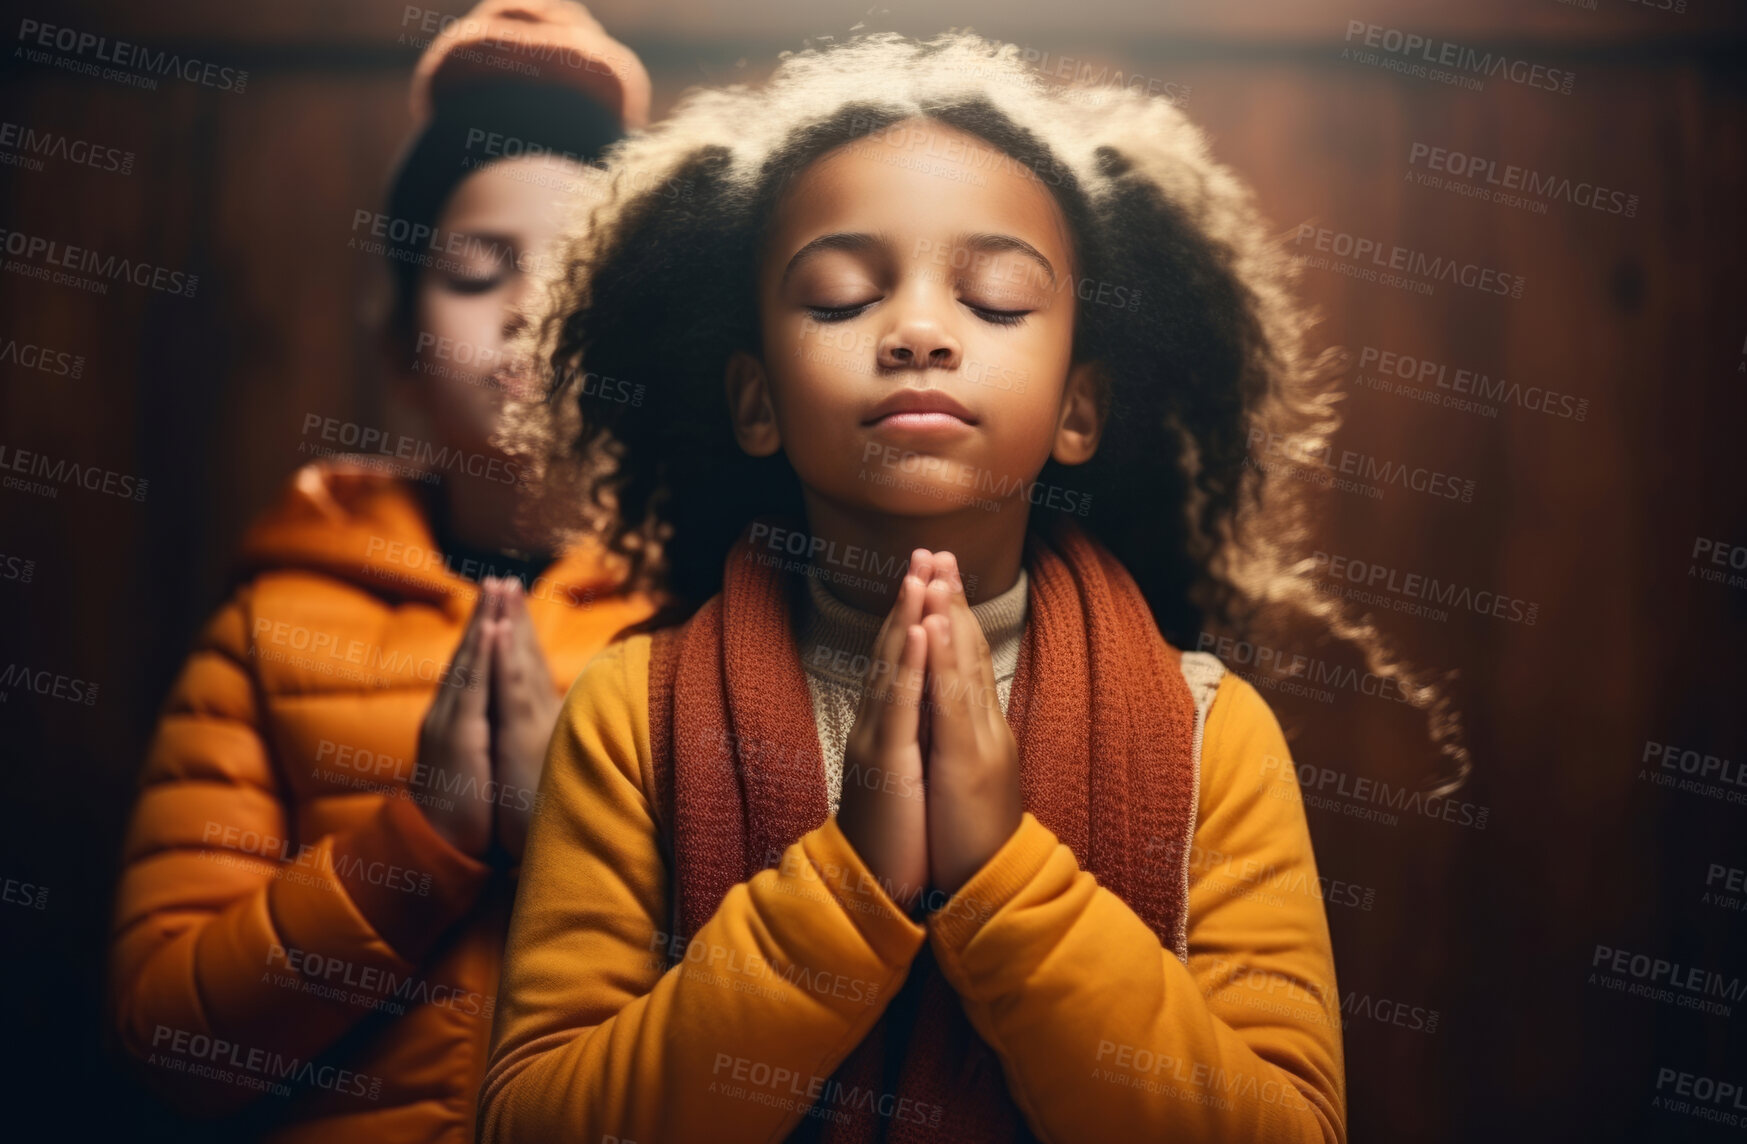 Buy stock photo Two African American girls praying. Hands folded against backdrop. Religion Concept.